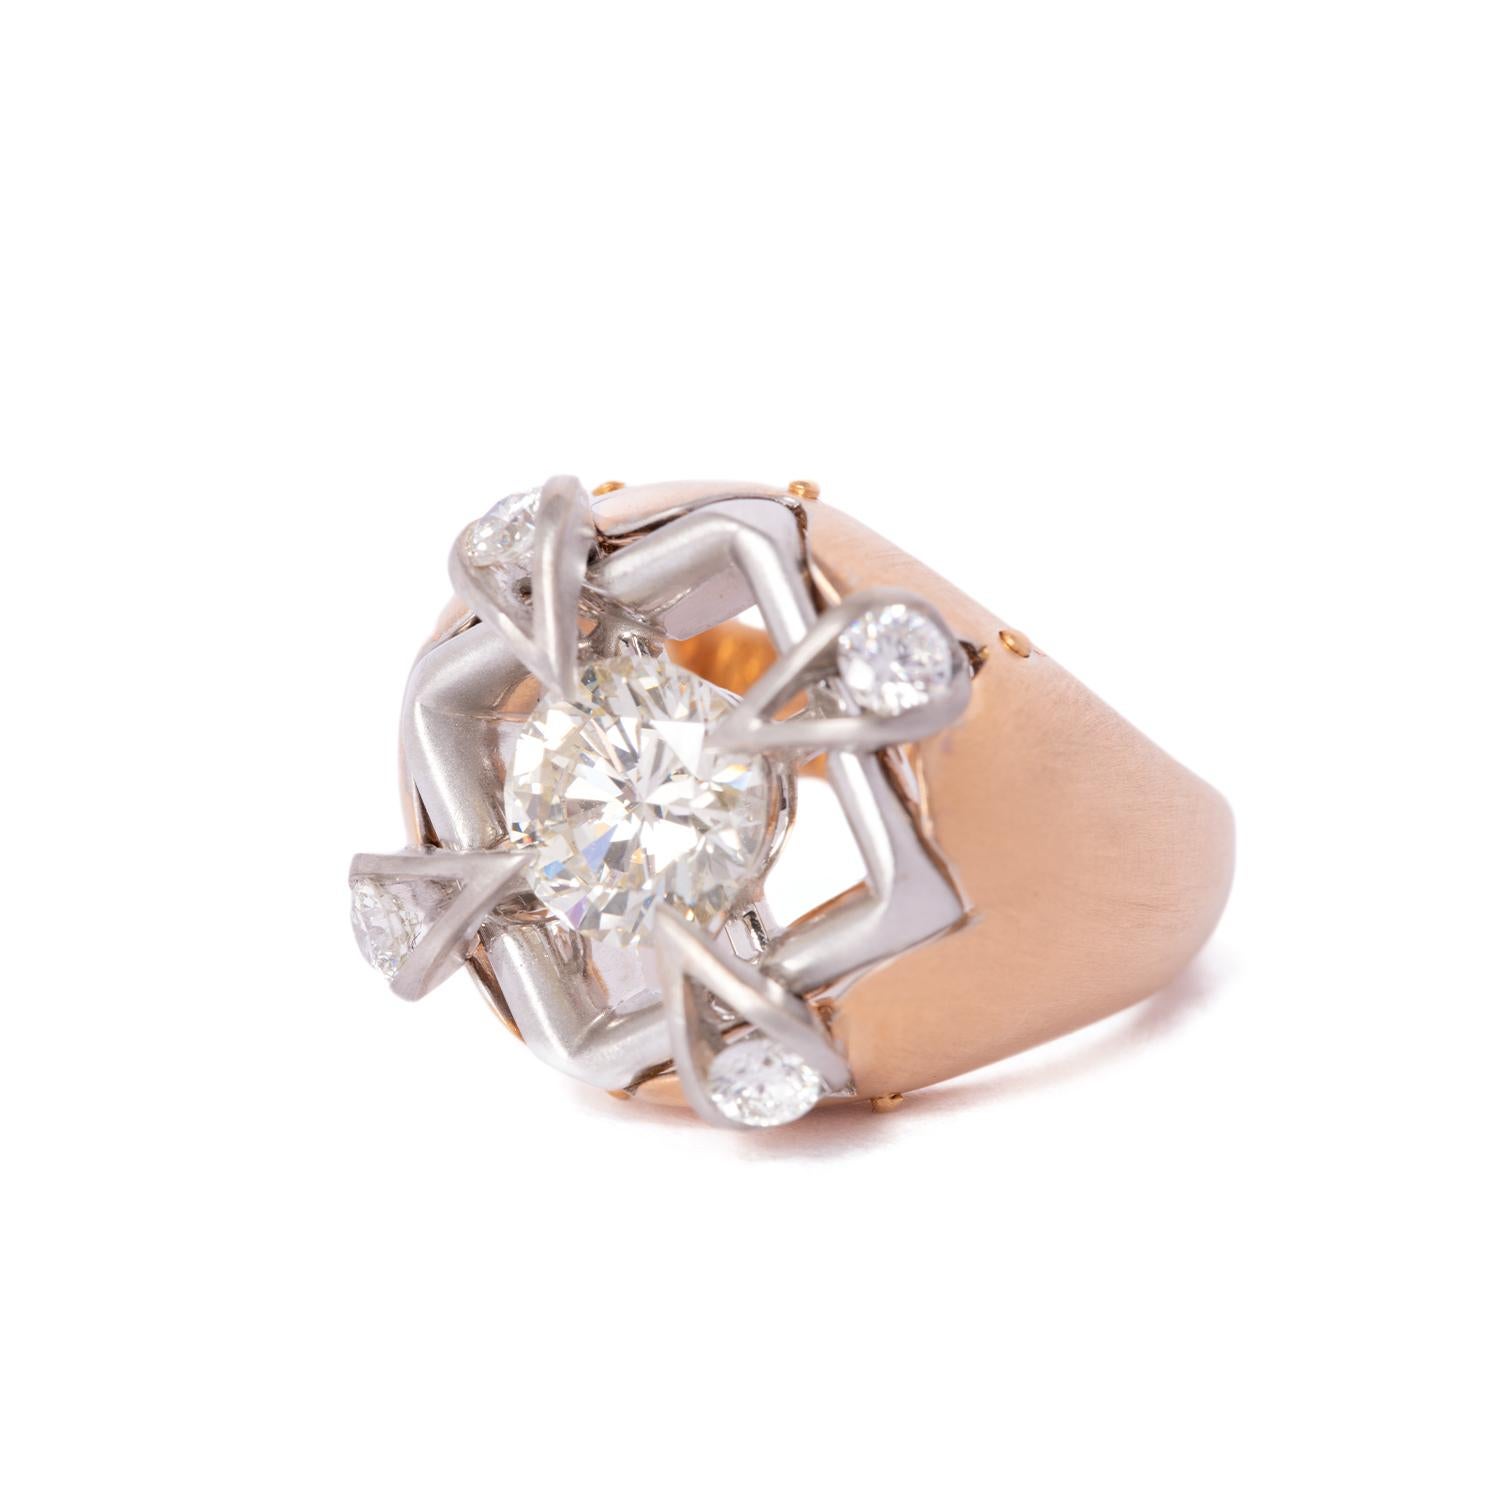 Brilliant Cut Alhambra Mounting 18 Karat Yellow and White Gold and Diamonds by Montebello